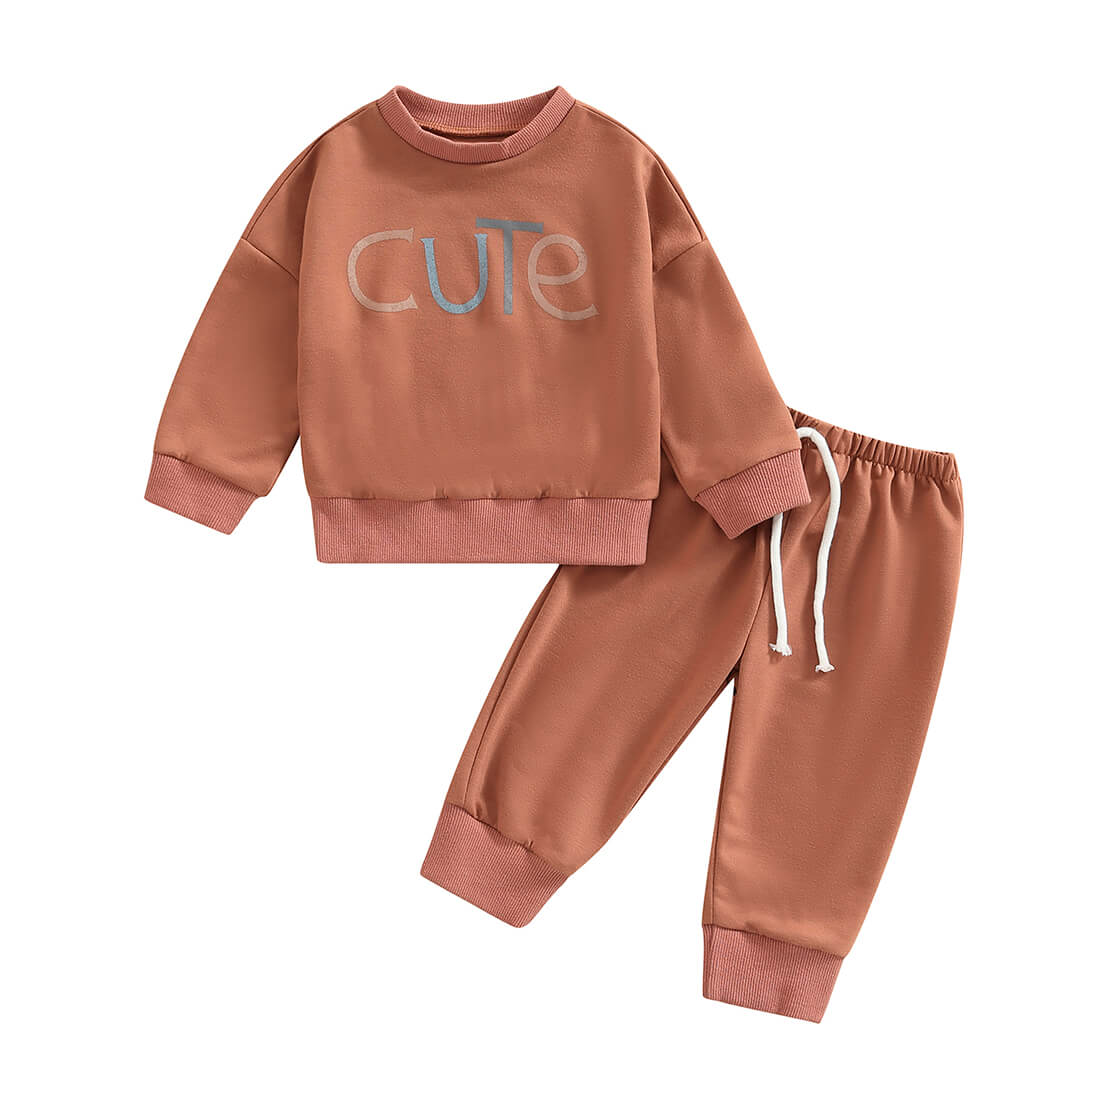 Solid Cute Toddler Set